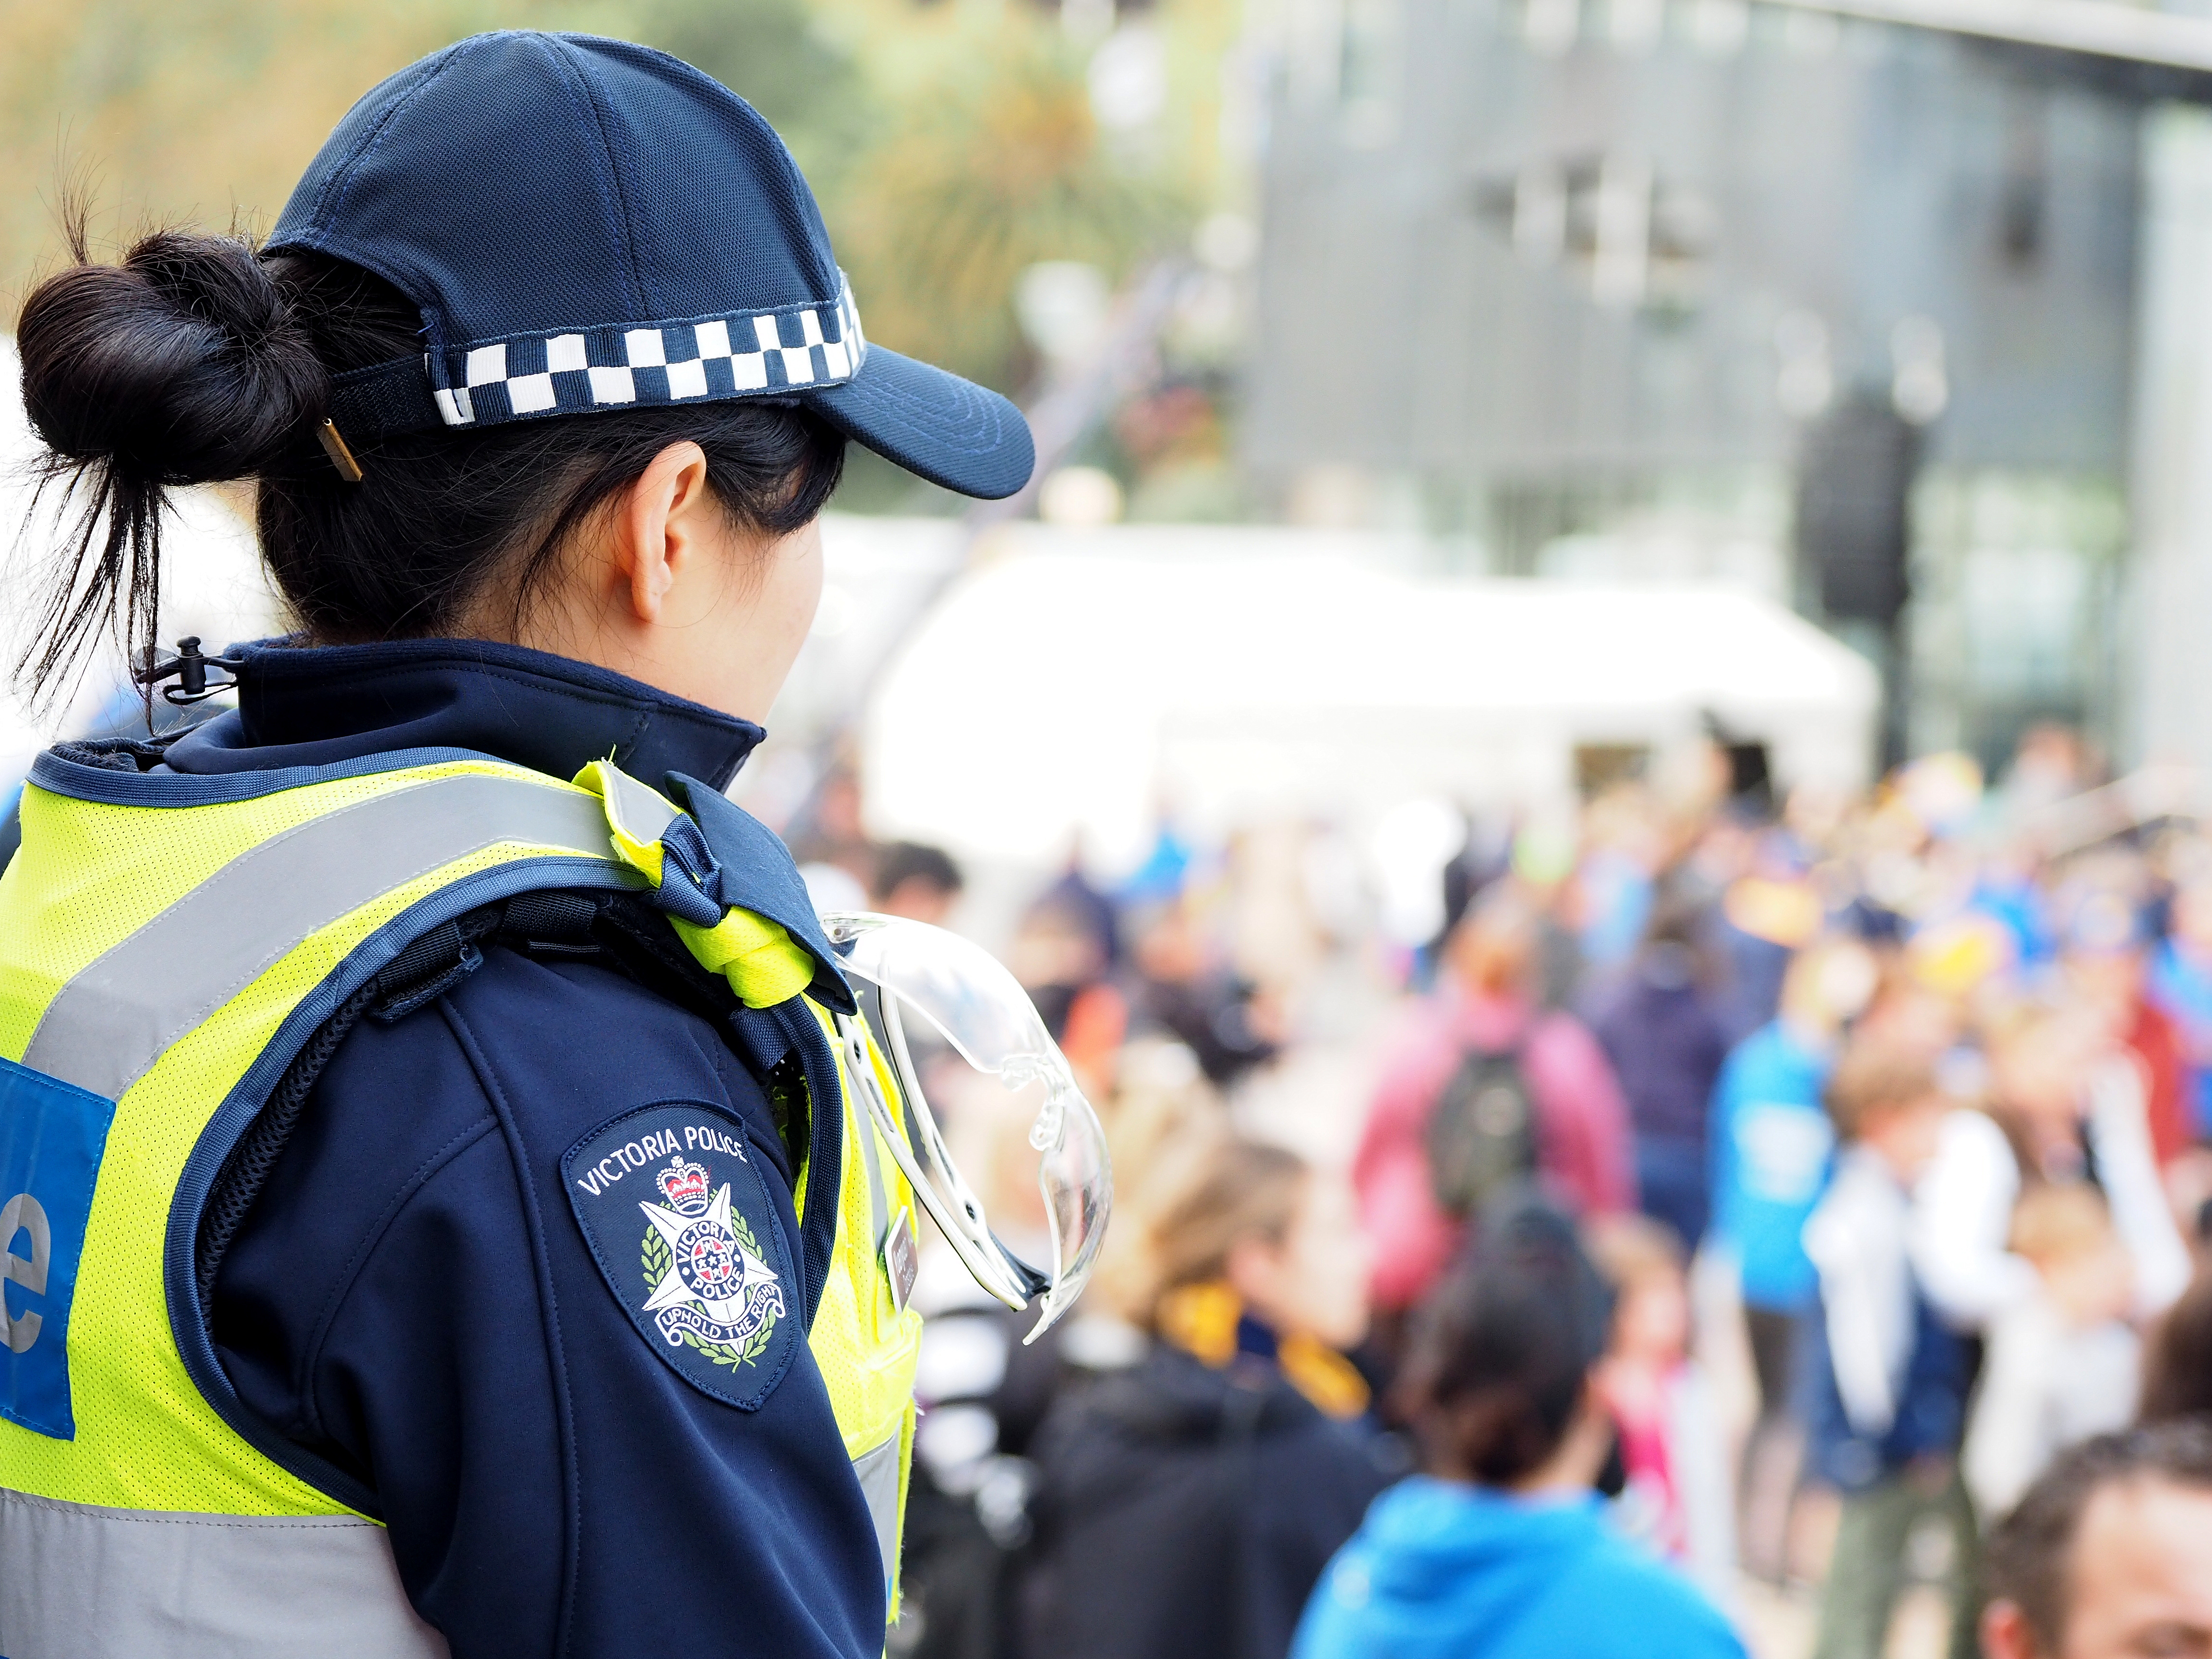 Victoria police officer standing.